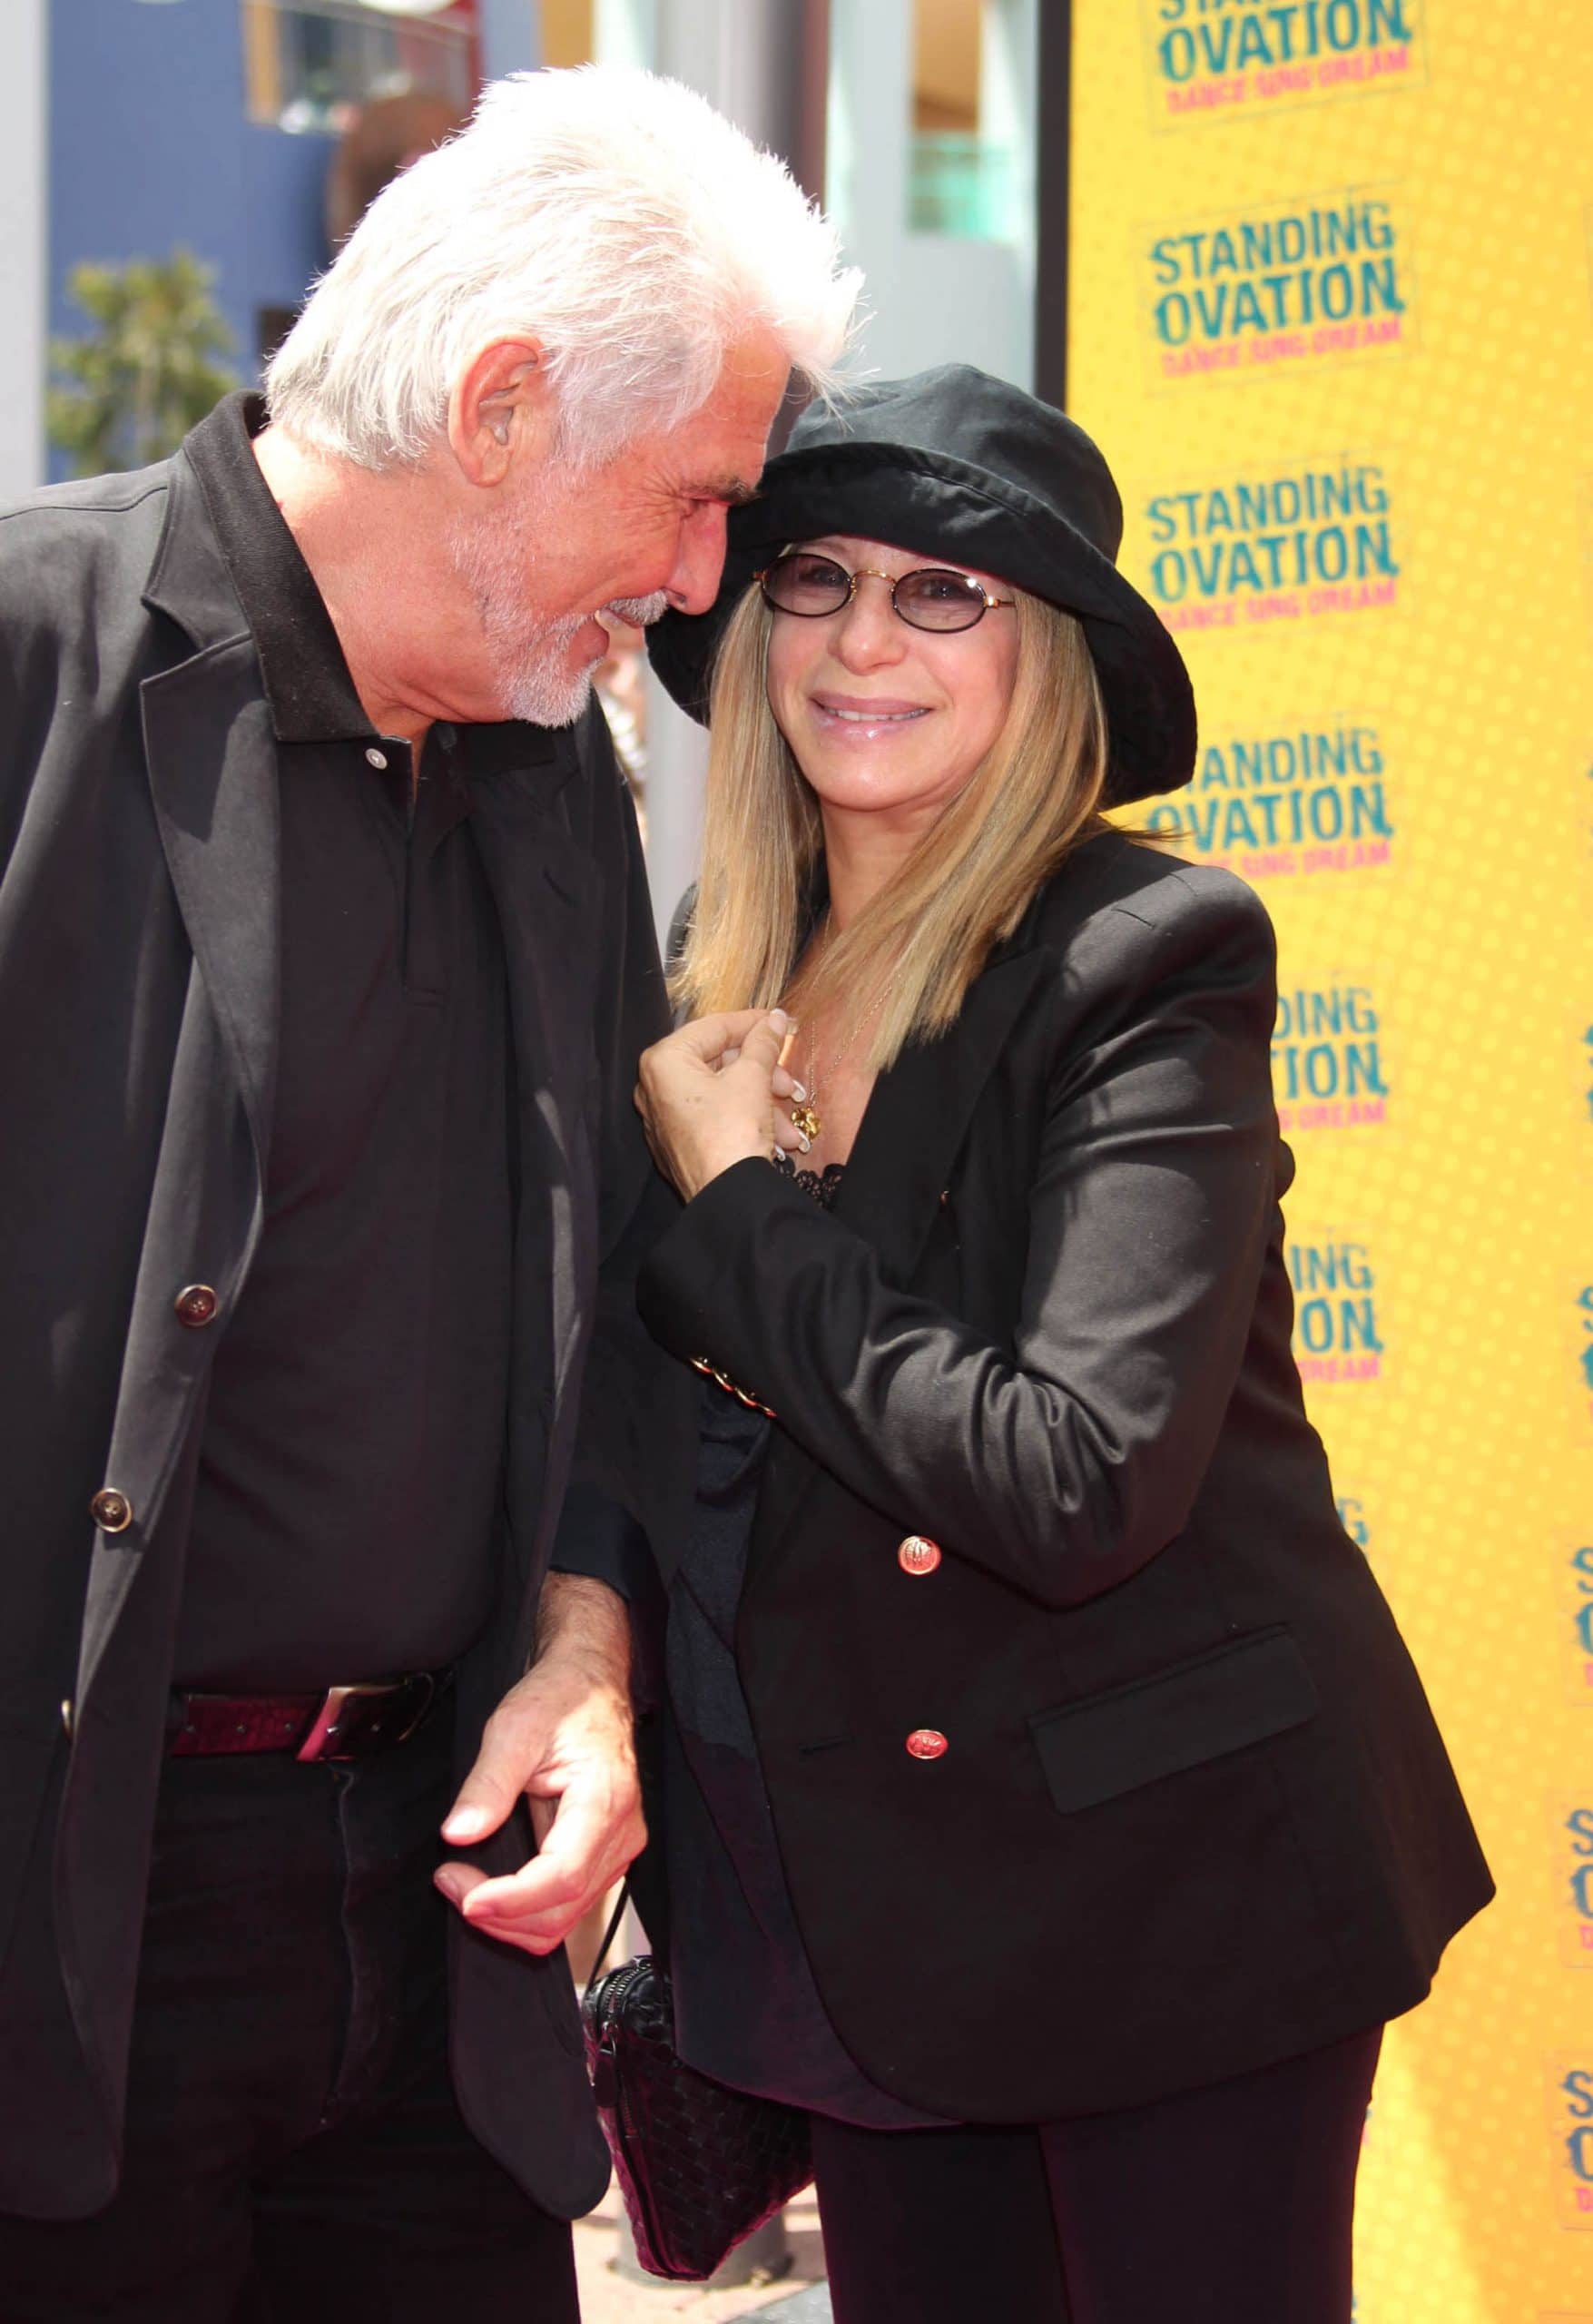 James Brolin and Barbra Streisand at the premiere of "Standing Ovation" 